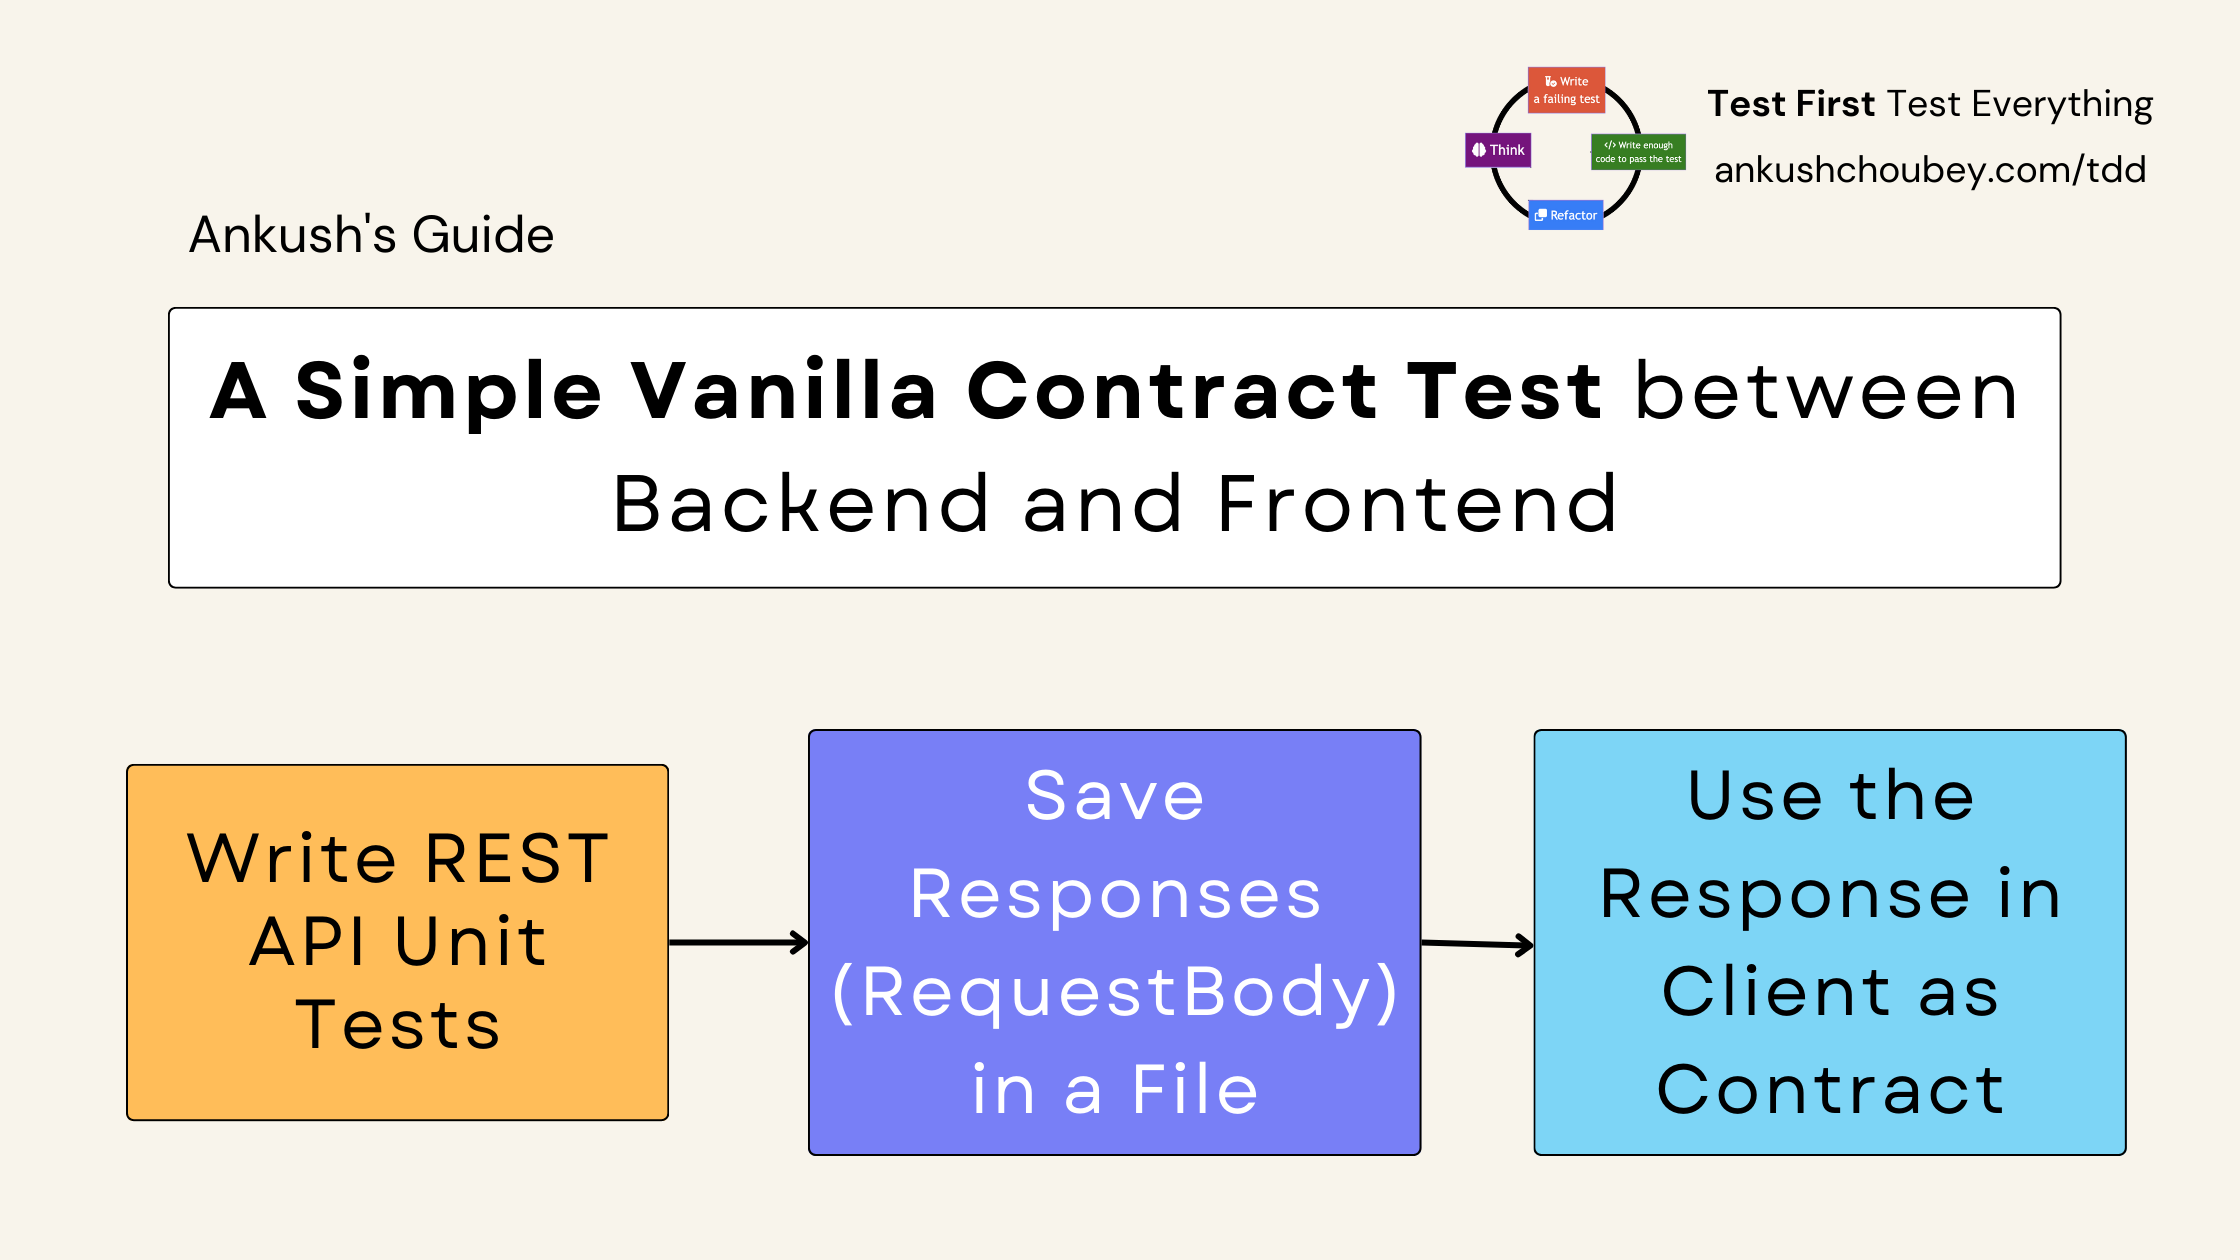 A Simple Vanilla Contract Test between Backend and Frontend